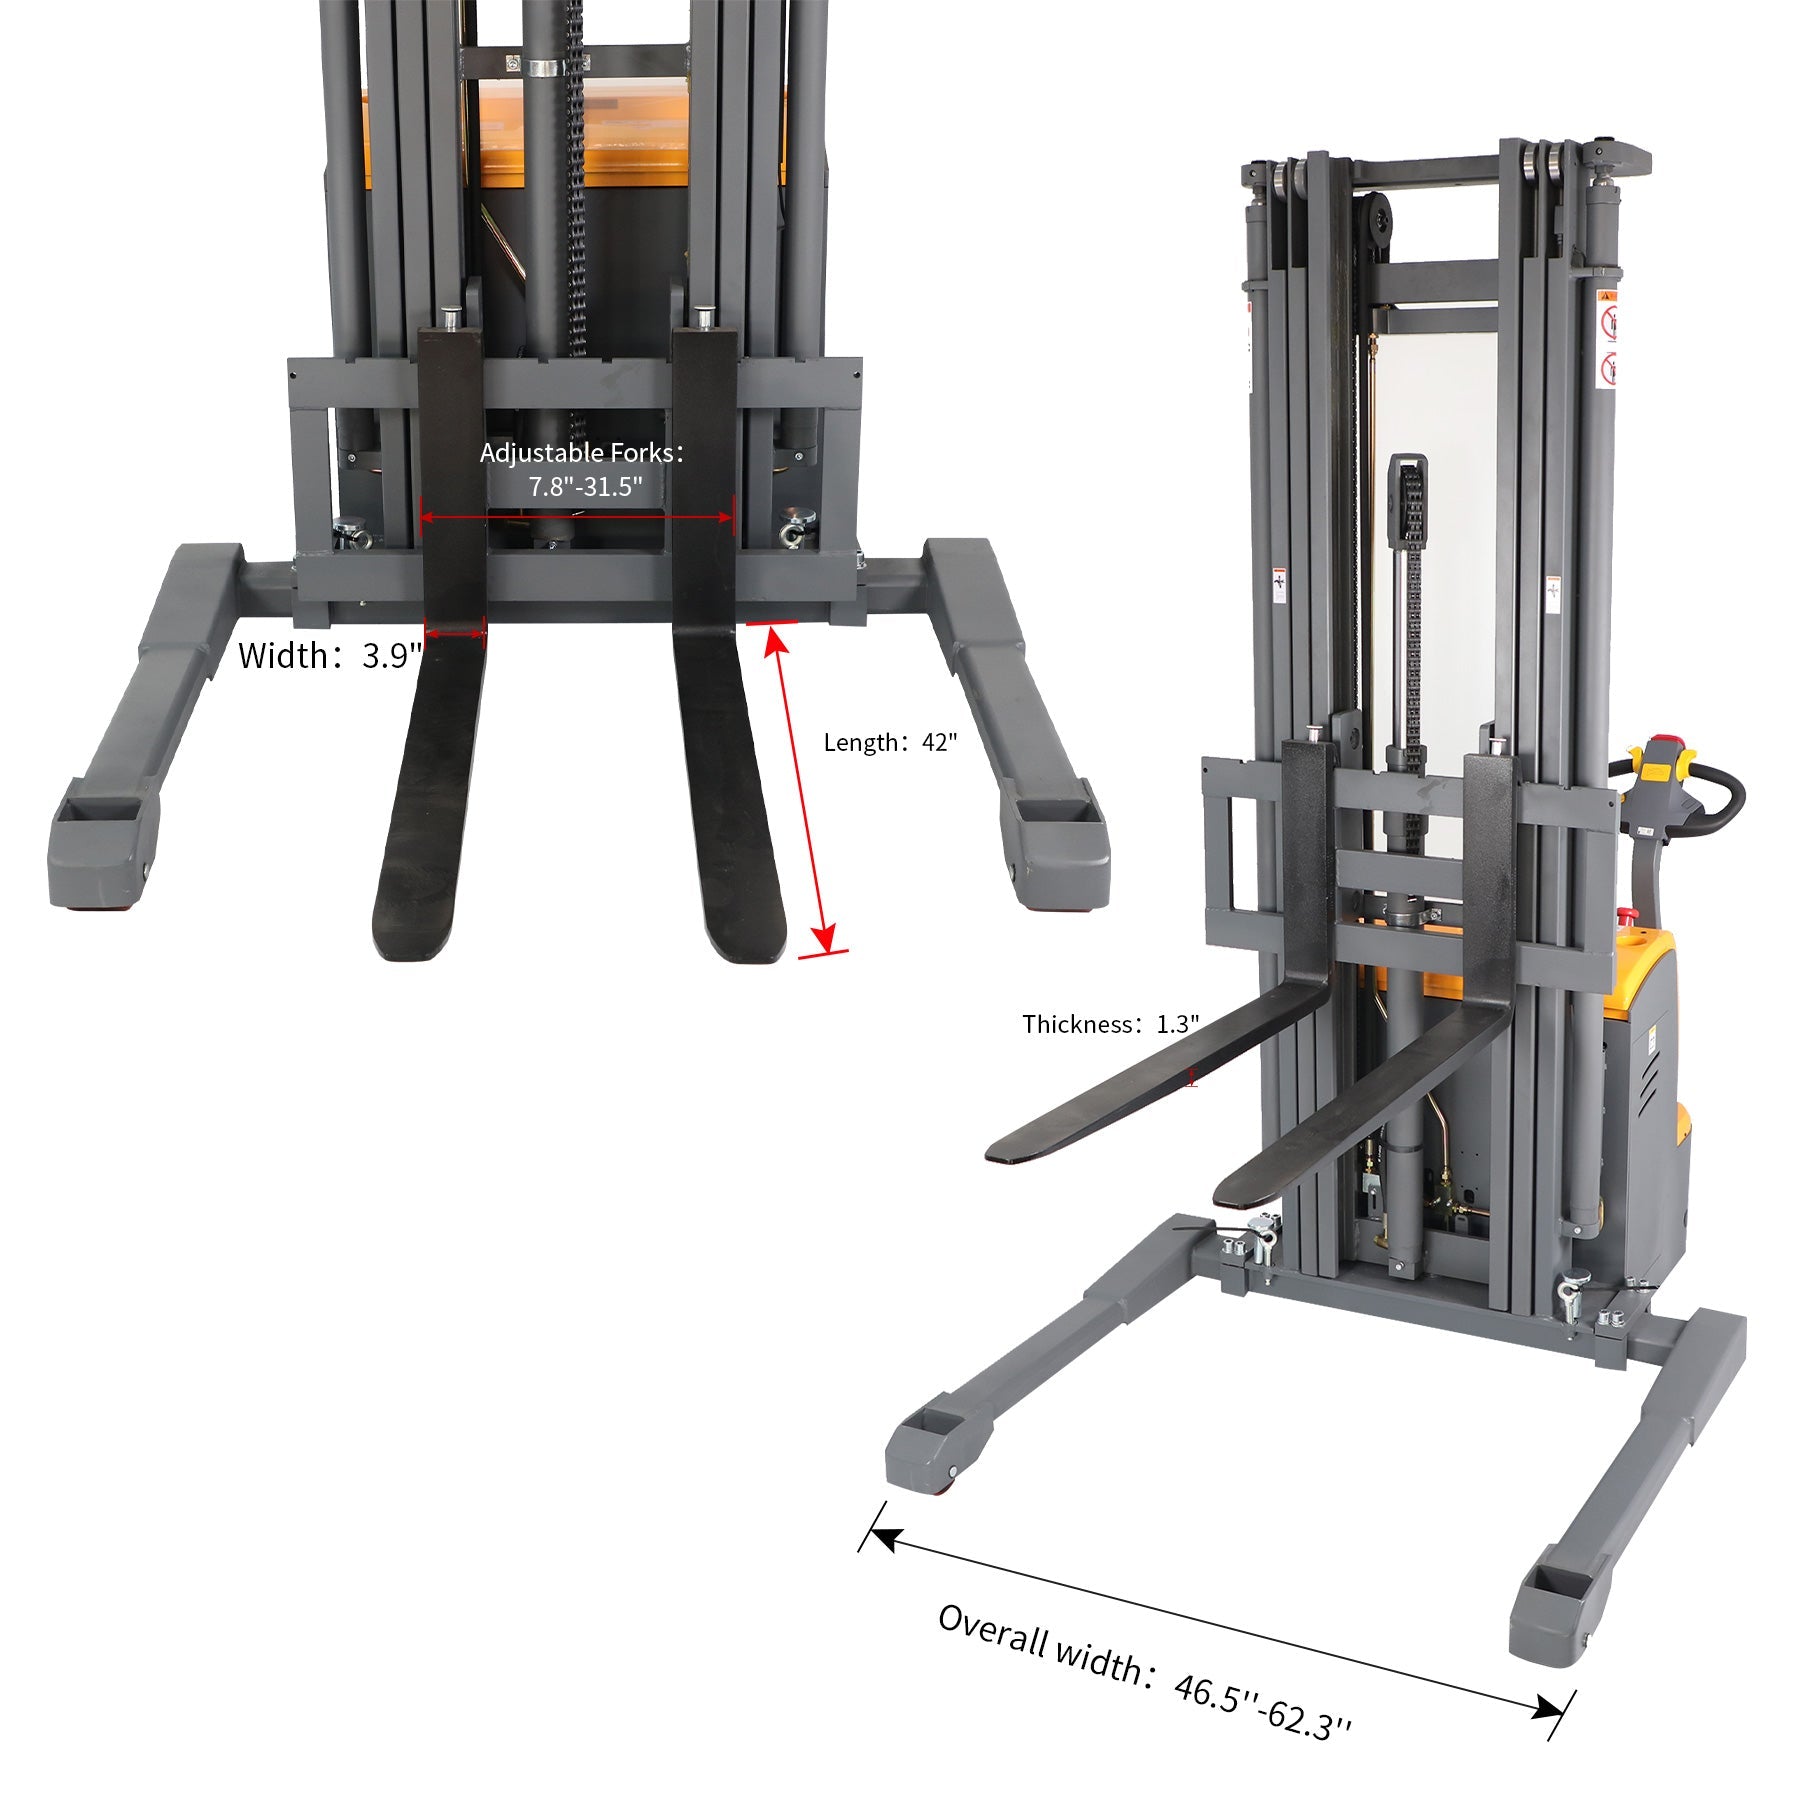 ApolloLift | Powered Forklift Full Electric Walkie Stacker 3300 lbs Cap. 220"Lifting A-3030